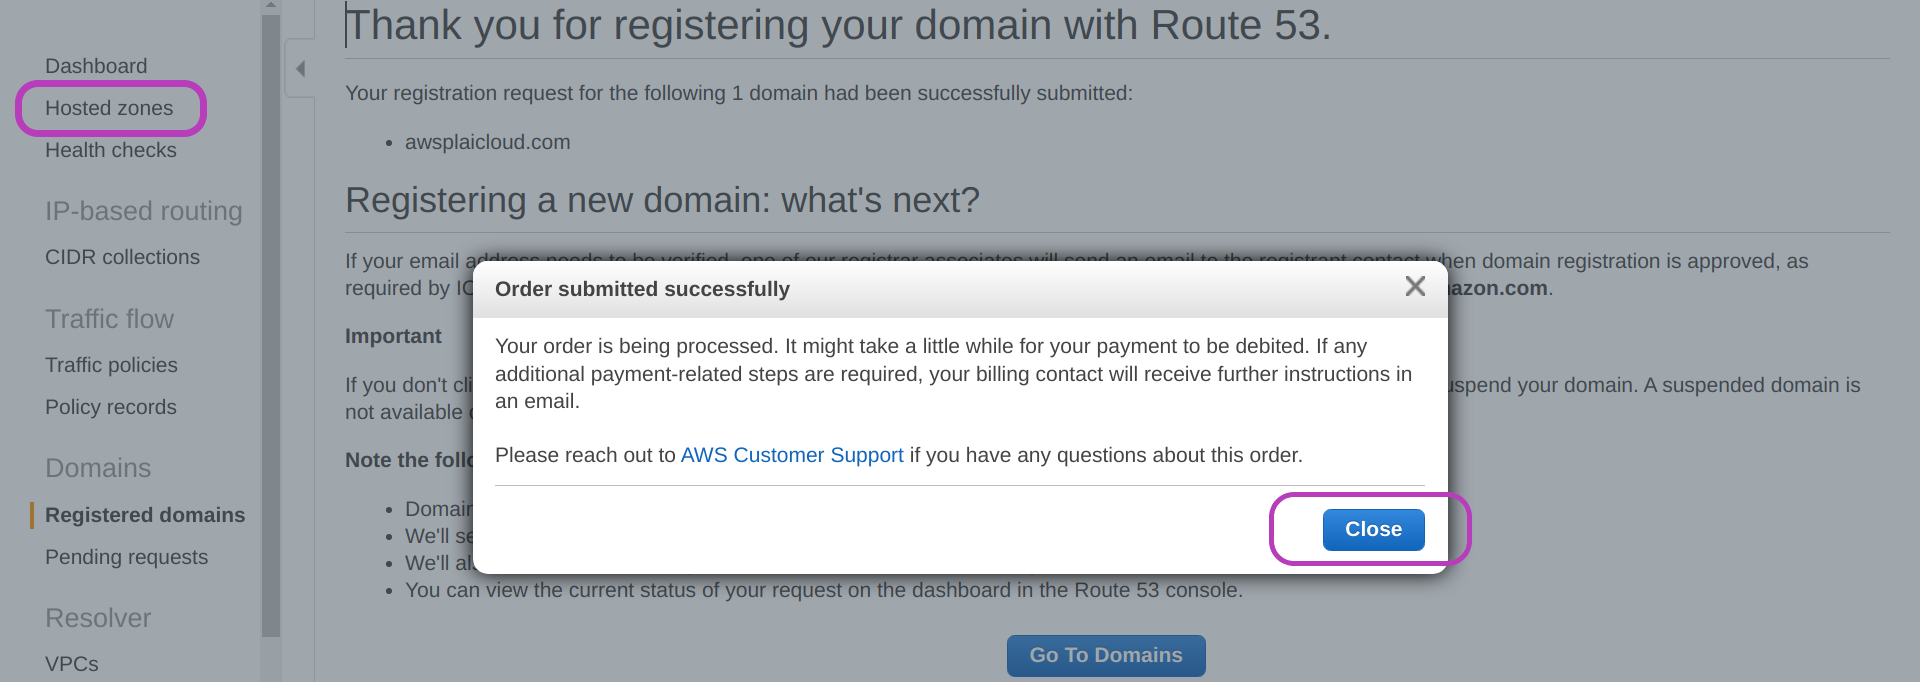 Screenshot of AWS Console "Thank you for registering your domain with Route 53" page in a browser showing the callout message "Order submitted successfully" and the button Close on the bottom right circled; also circled is the option "Hosted zones" on the top left in the pane menu of the page